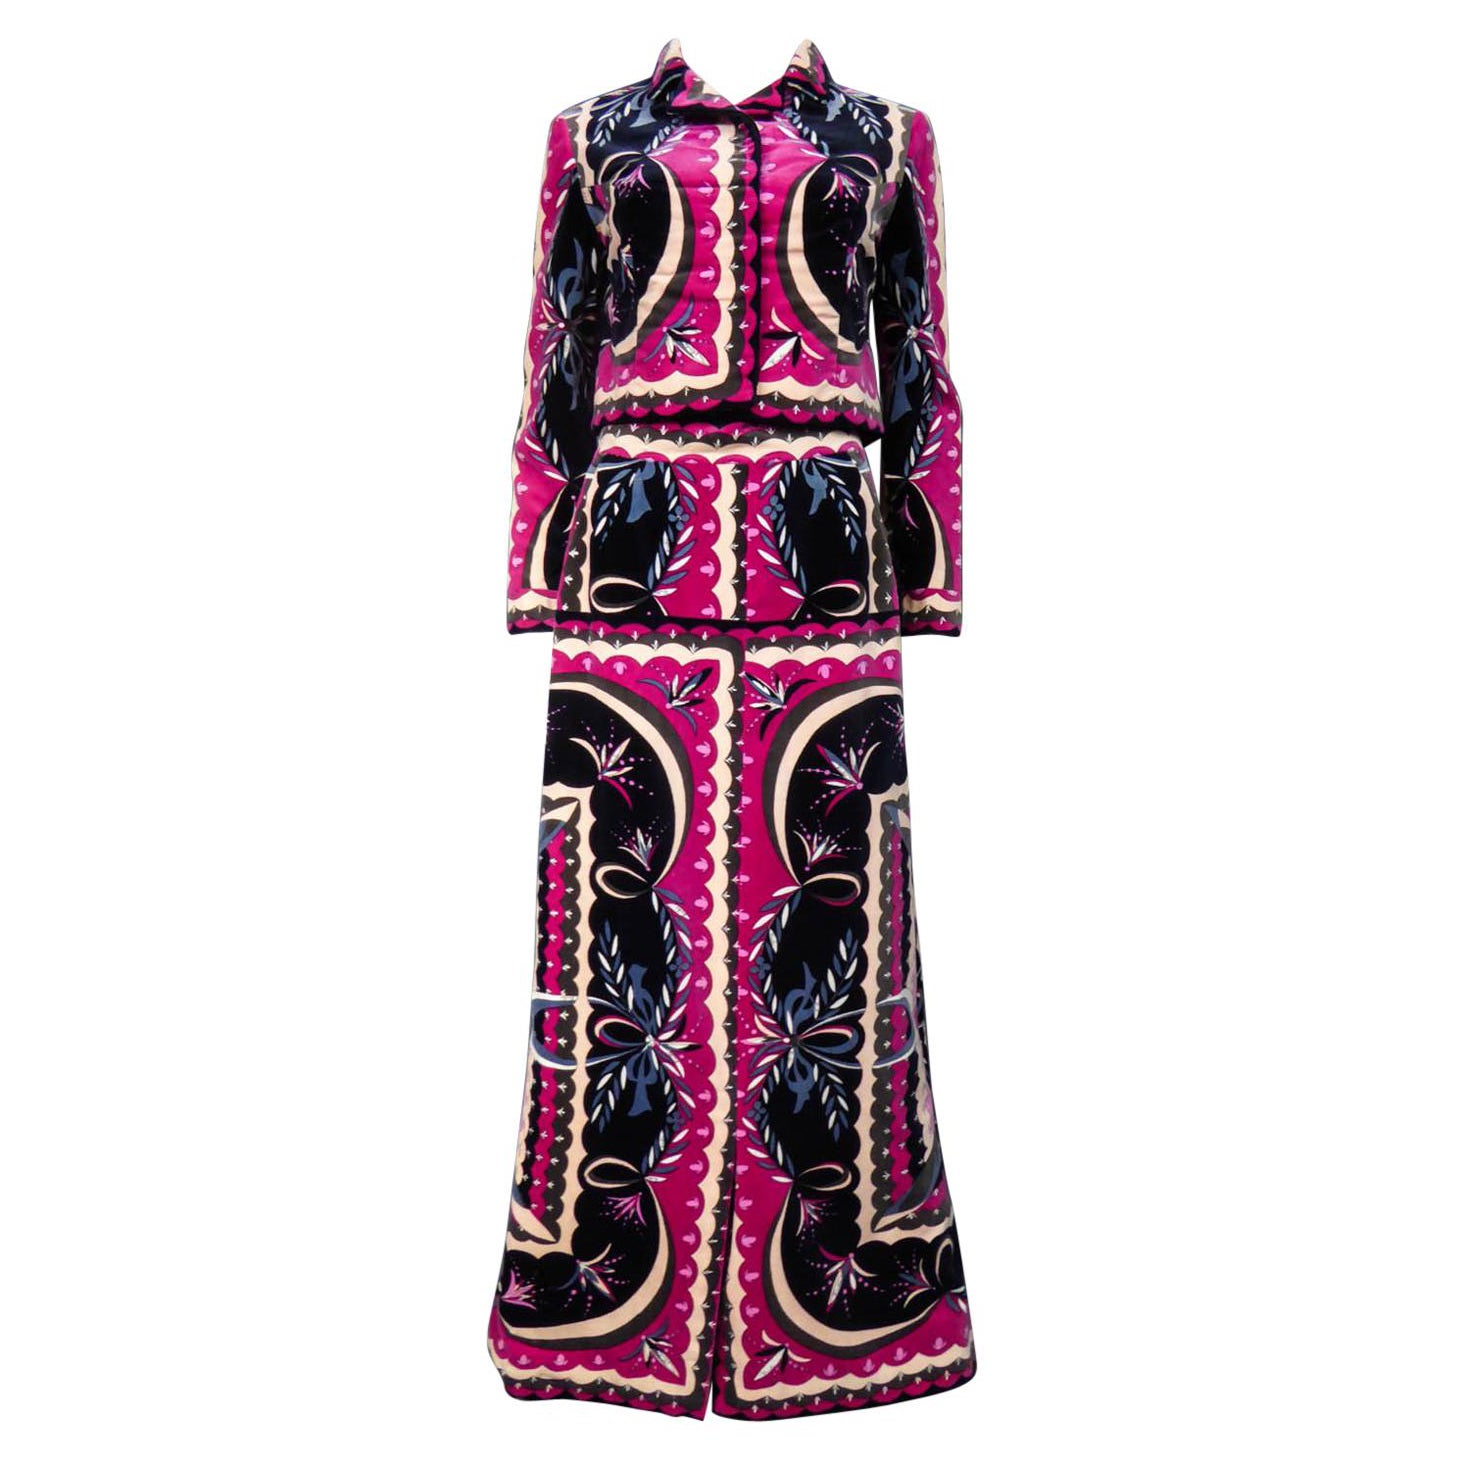 An Emilio Pucci Printed Velvet Jacket and Skirt Set Circa 1970 For Sale